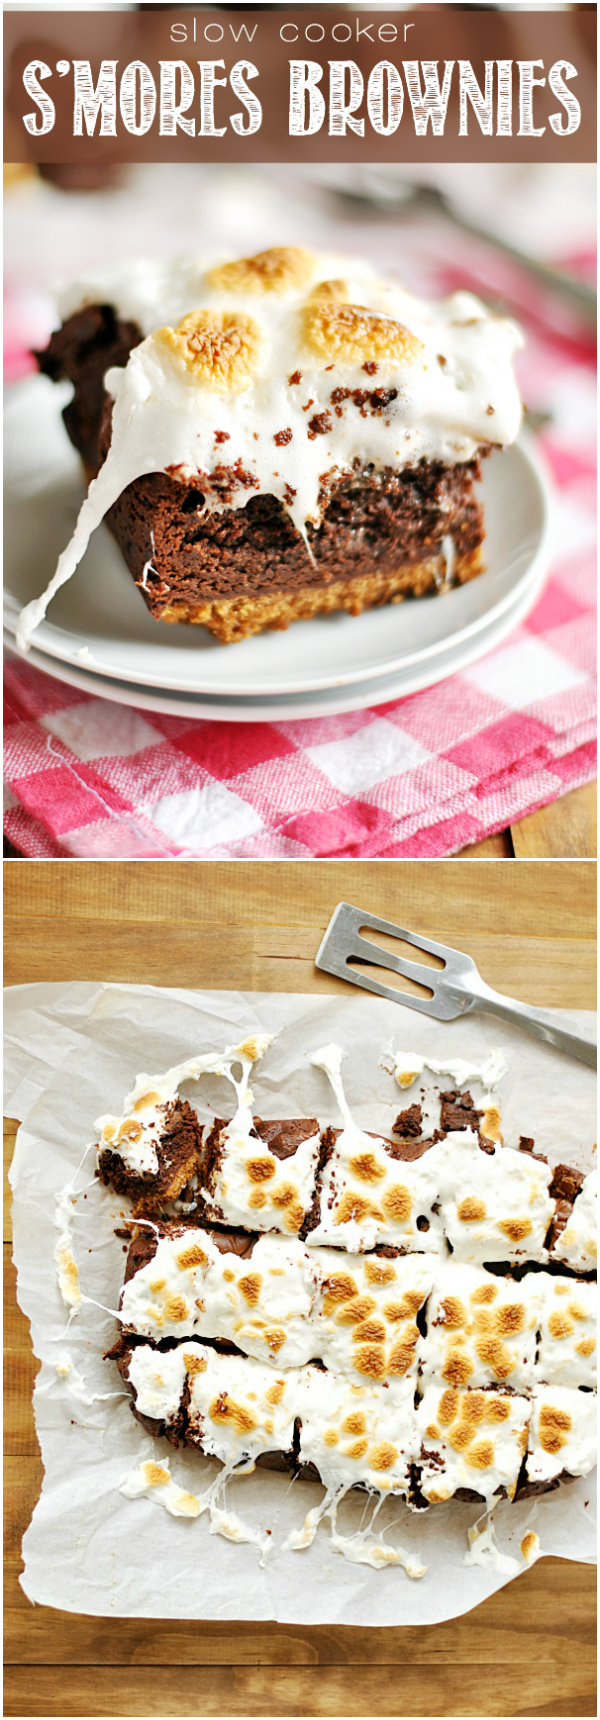 S'mores Brownies | 25+ slow cooker dessert recipes